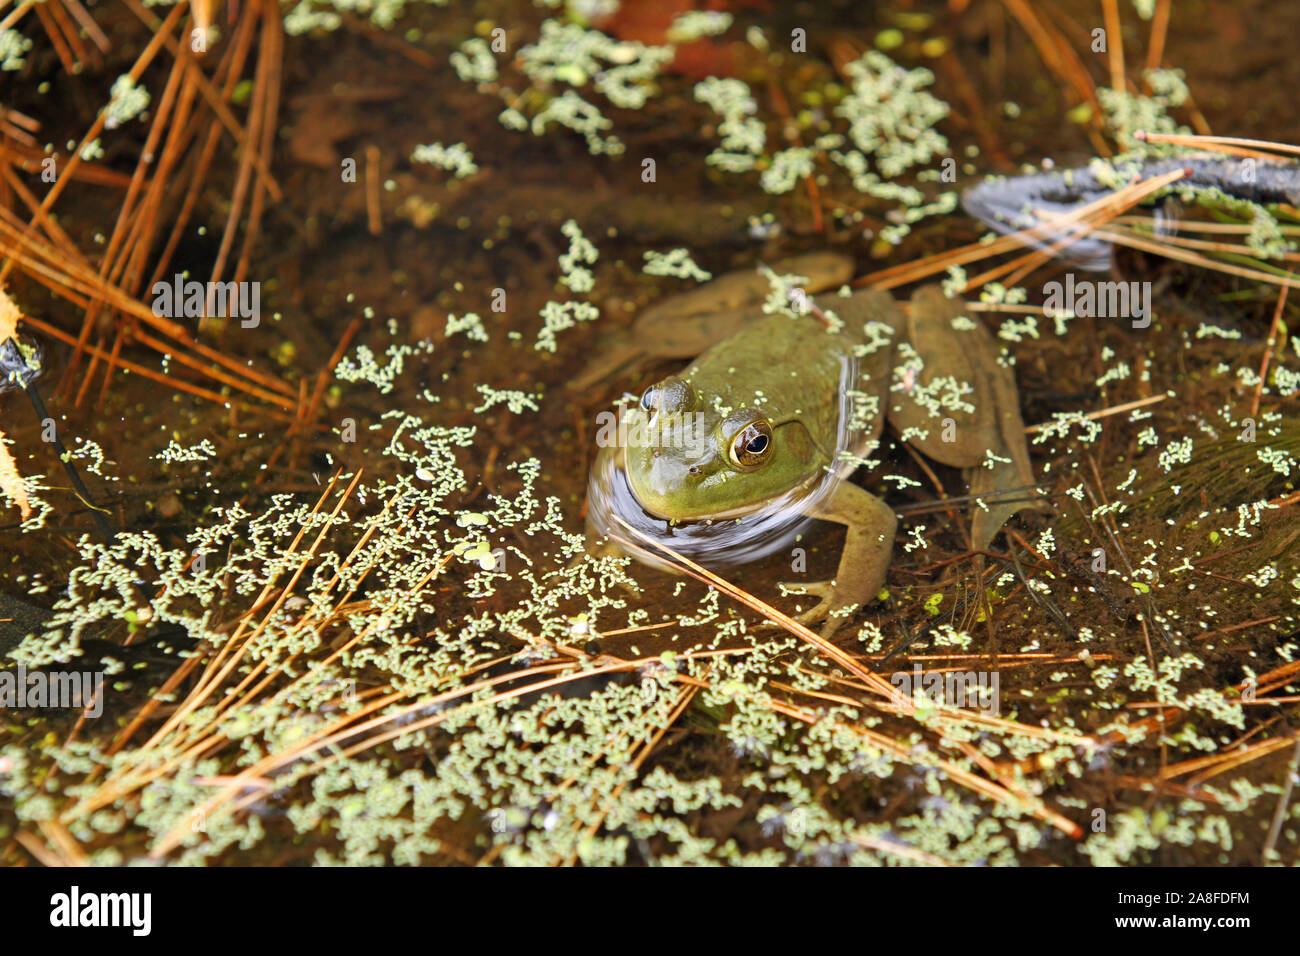 North American bullfrog (Rana catesbeiana) sitting in a shallow freshwater pond amid algae with head protruding and body visible beneath the water Stock Photo